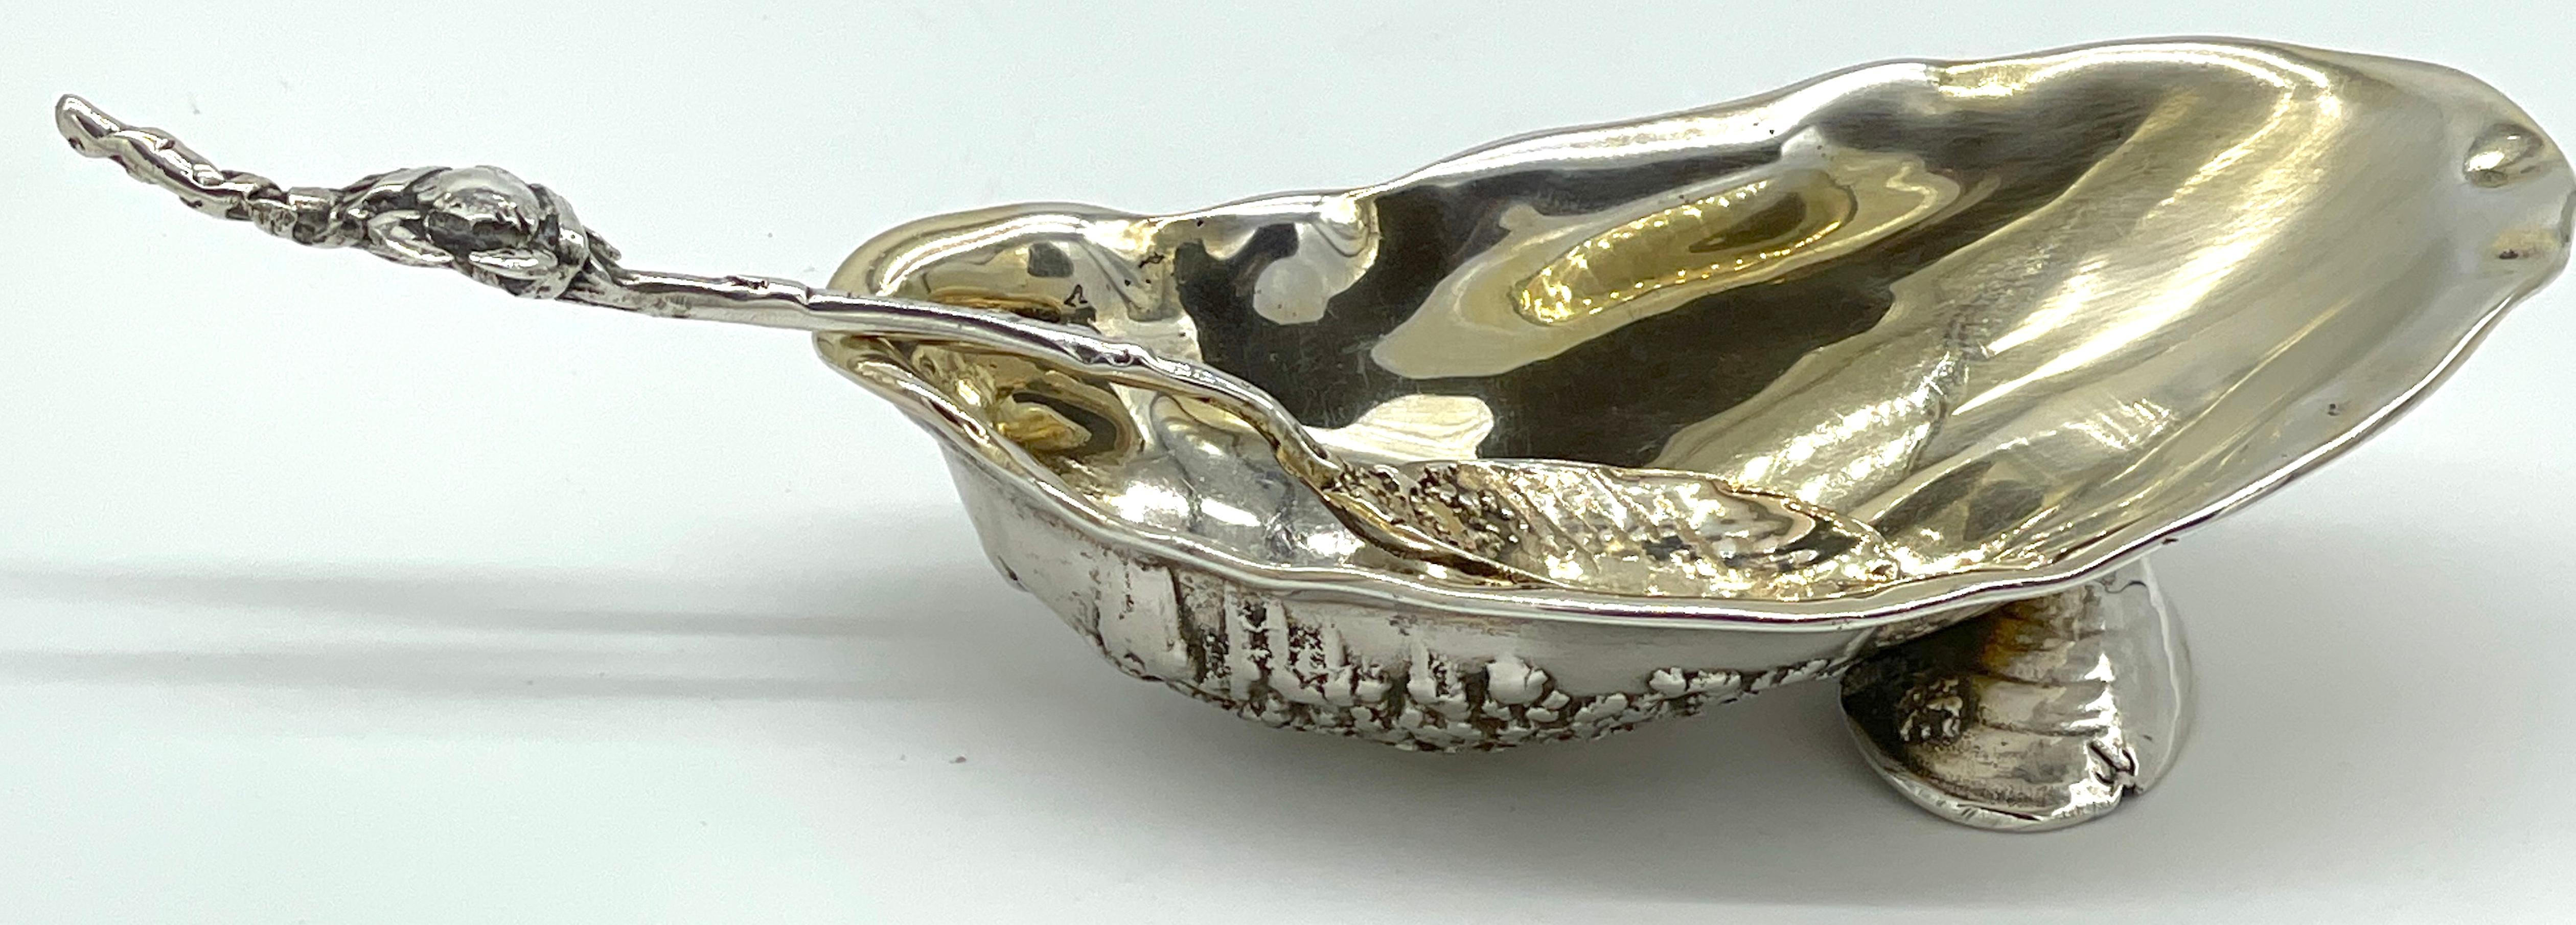 Gorham 'Narragansett' Gold Washed Sterling Shell Dish & Figural Crab Spoon  For Sale 8